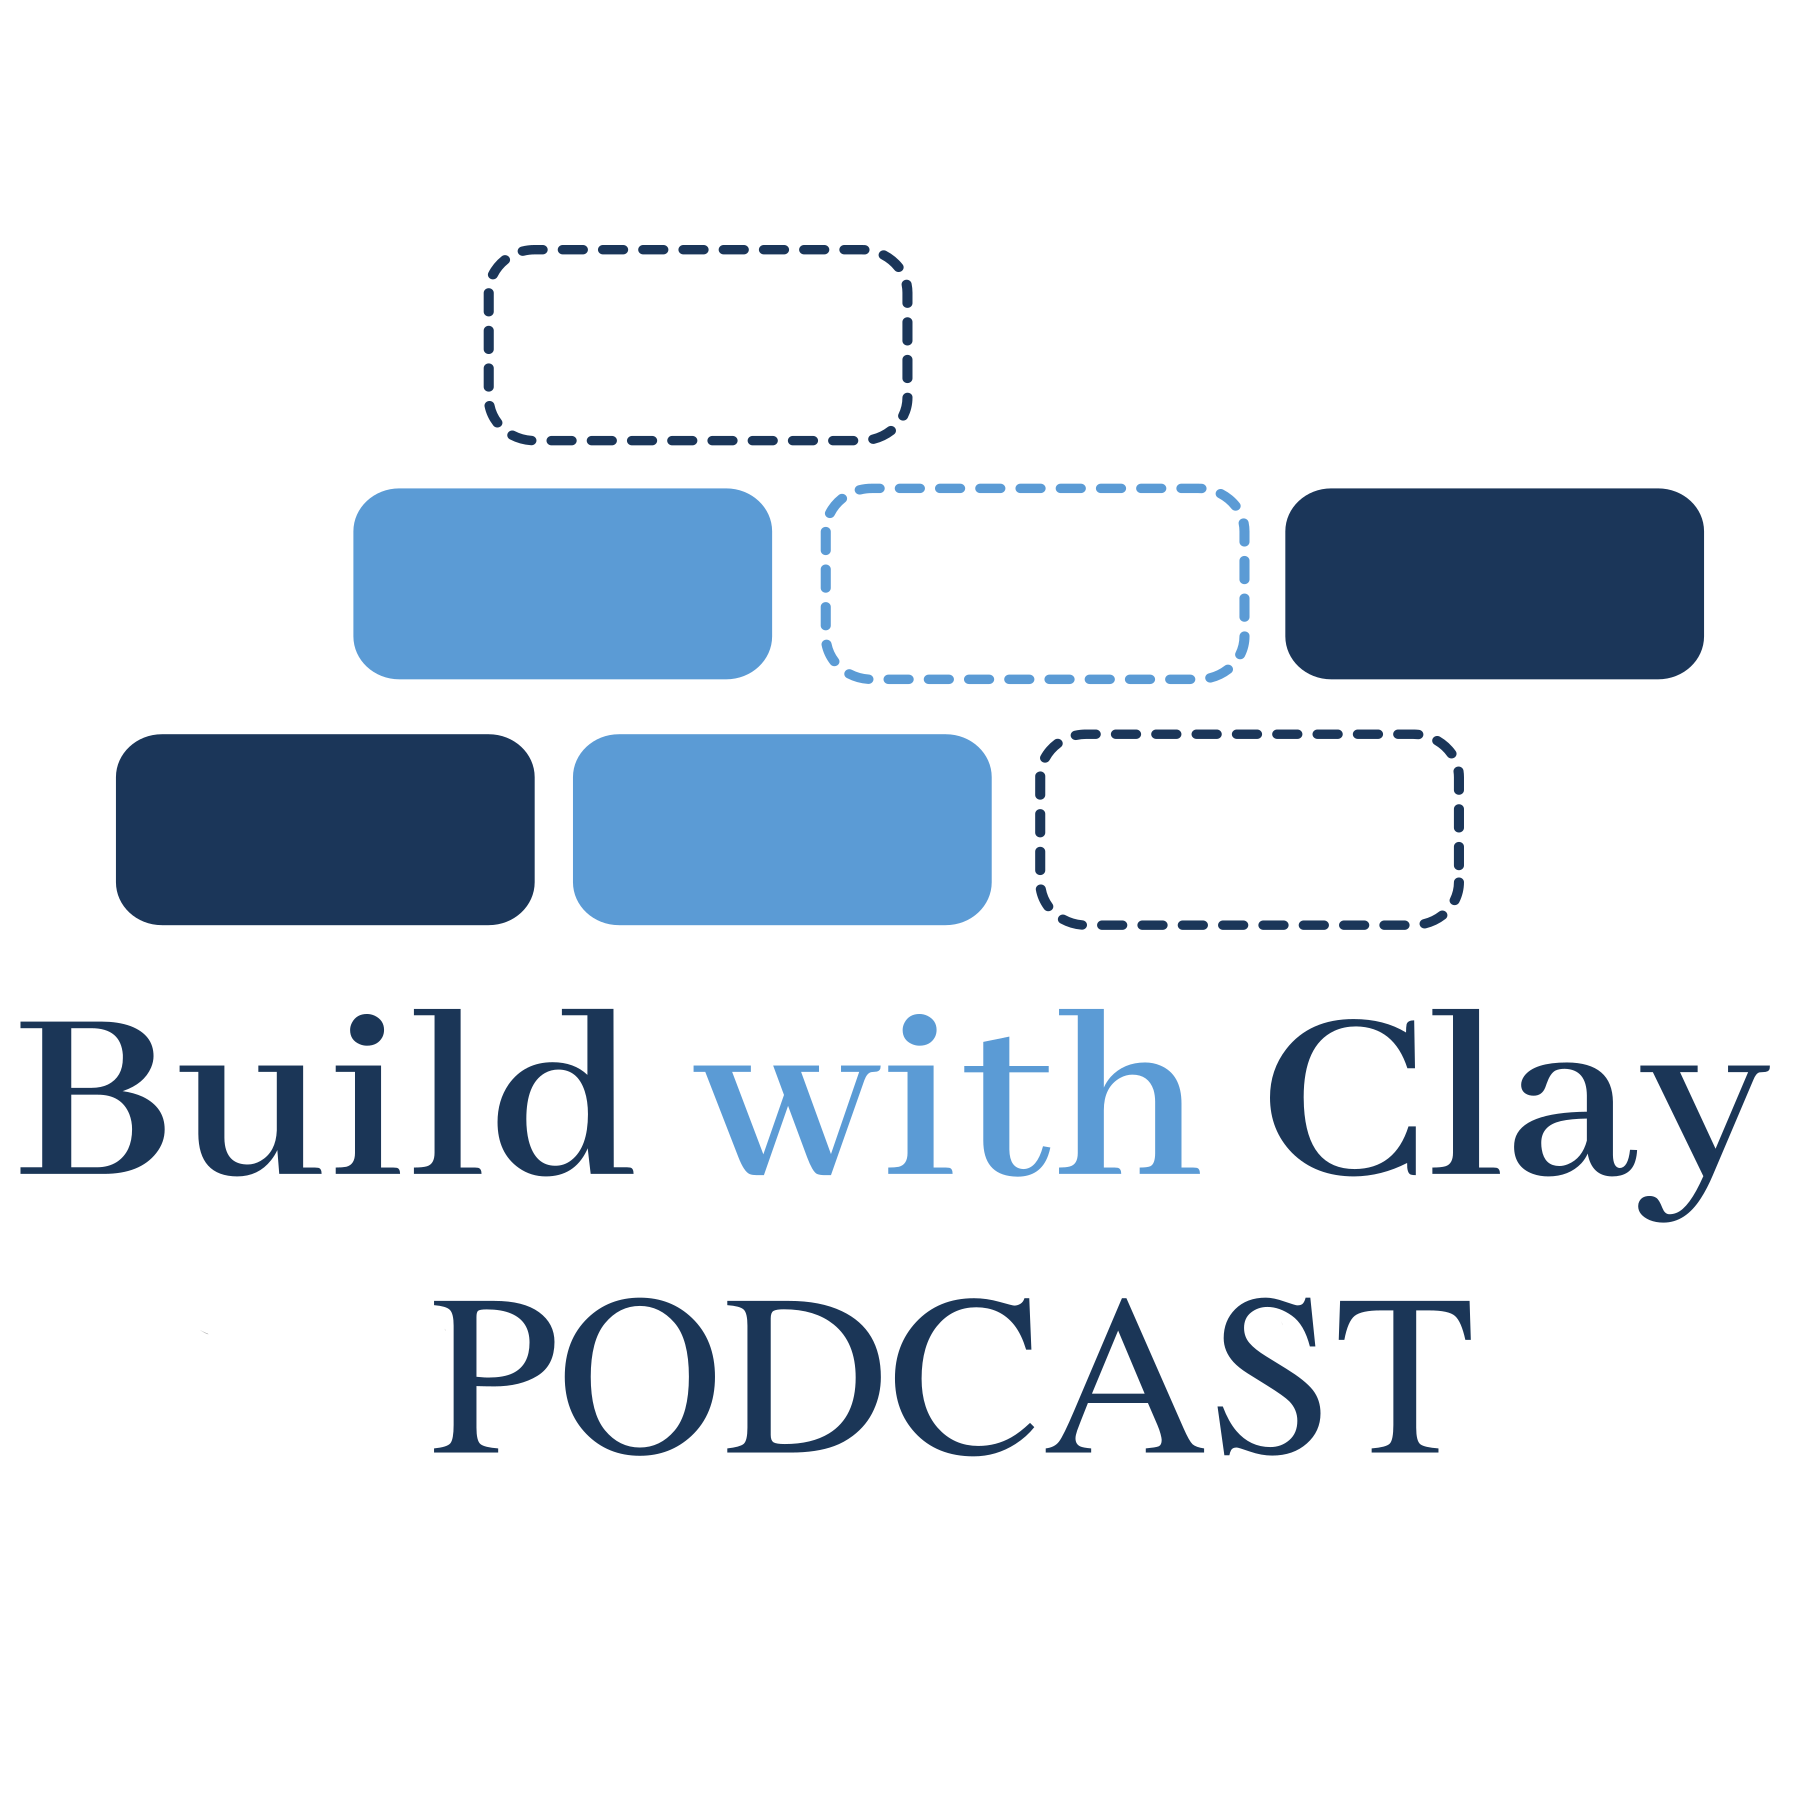 Artwork for Build with Clay Podcast